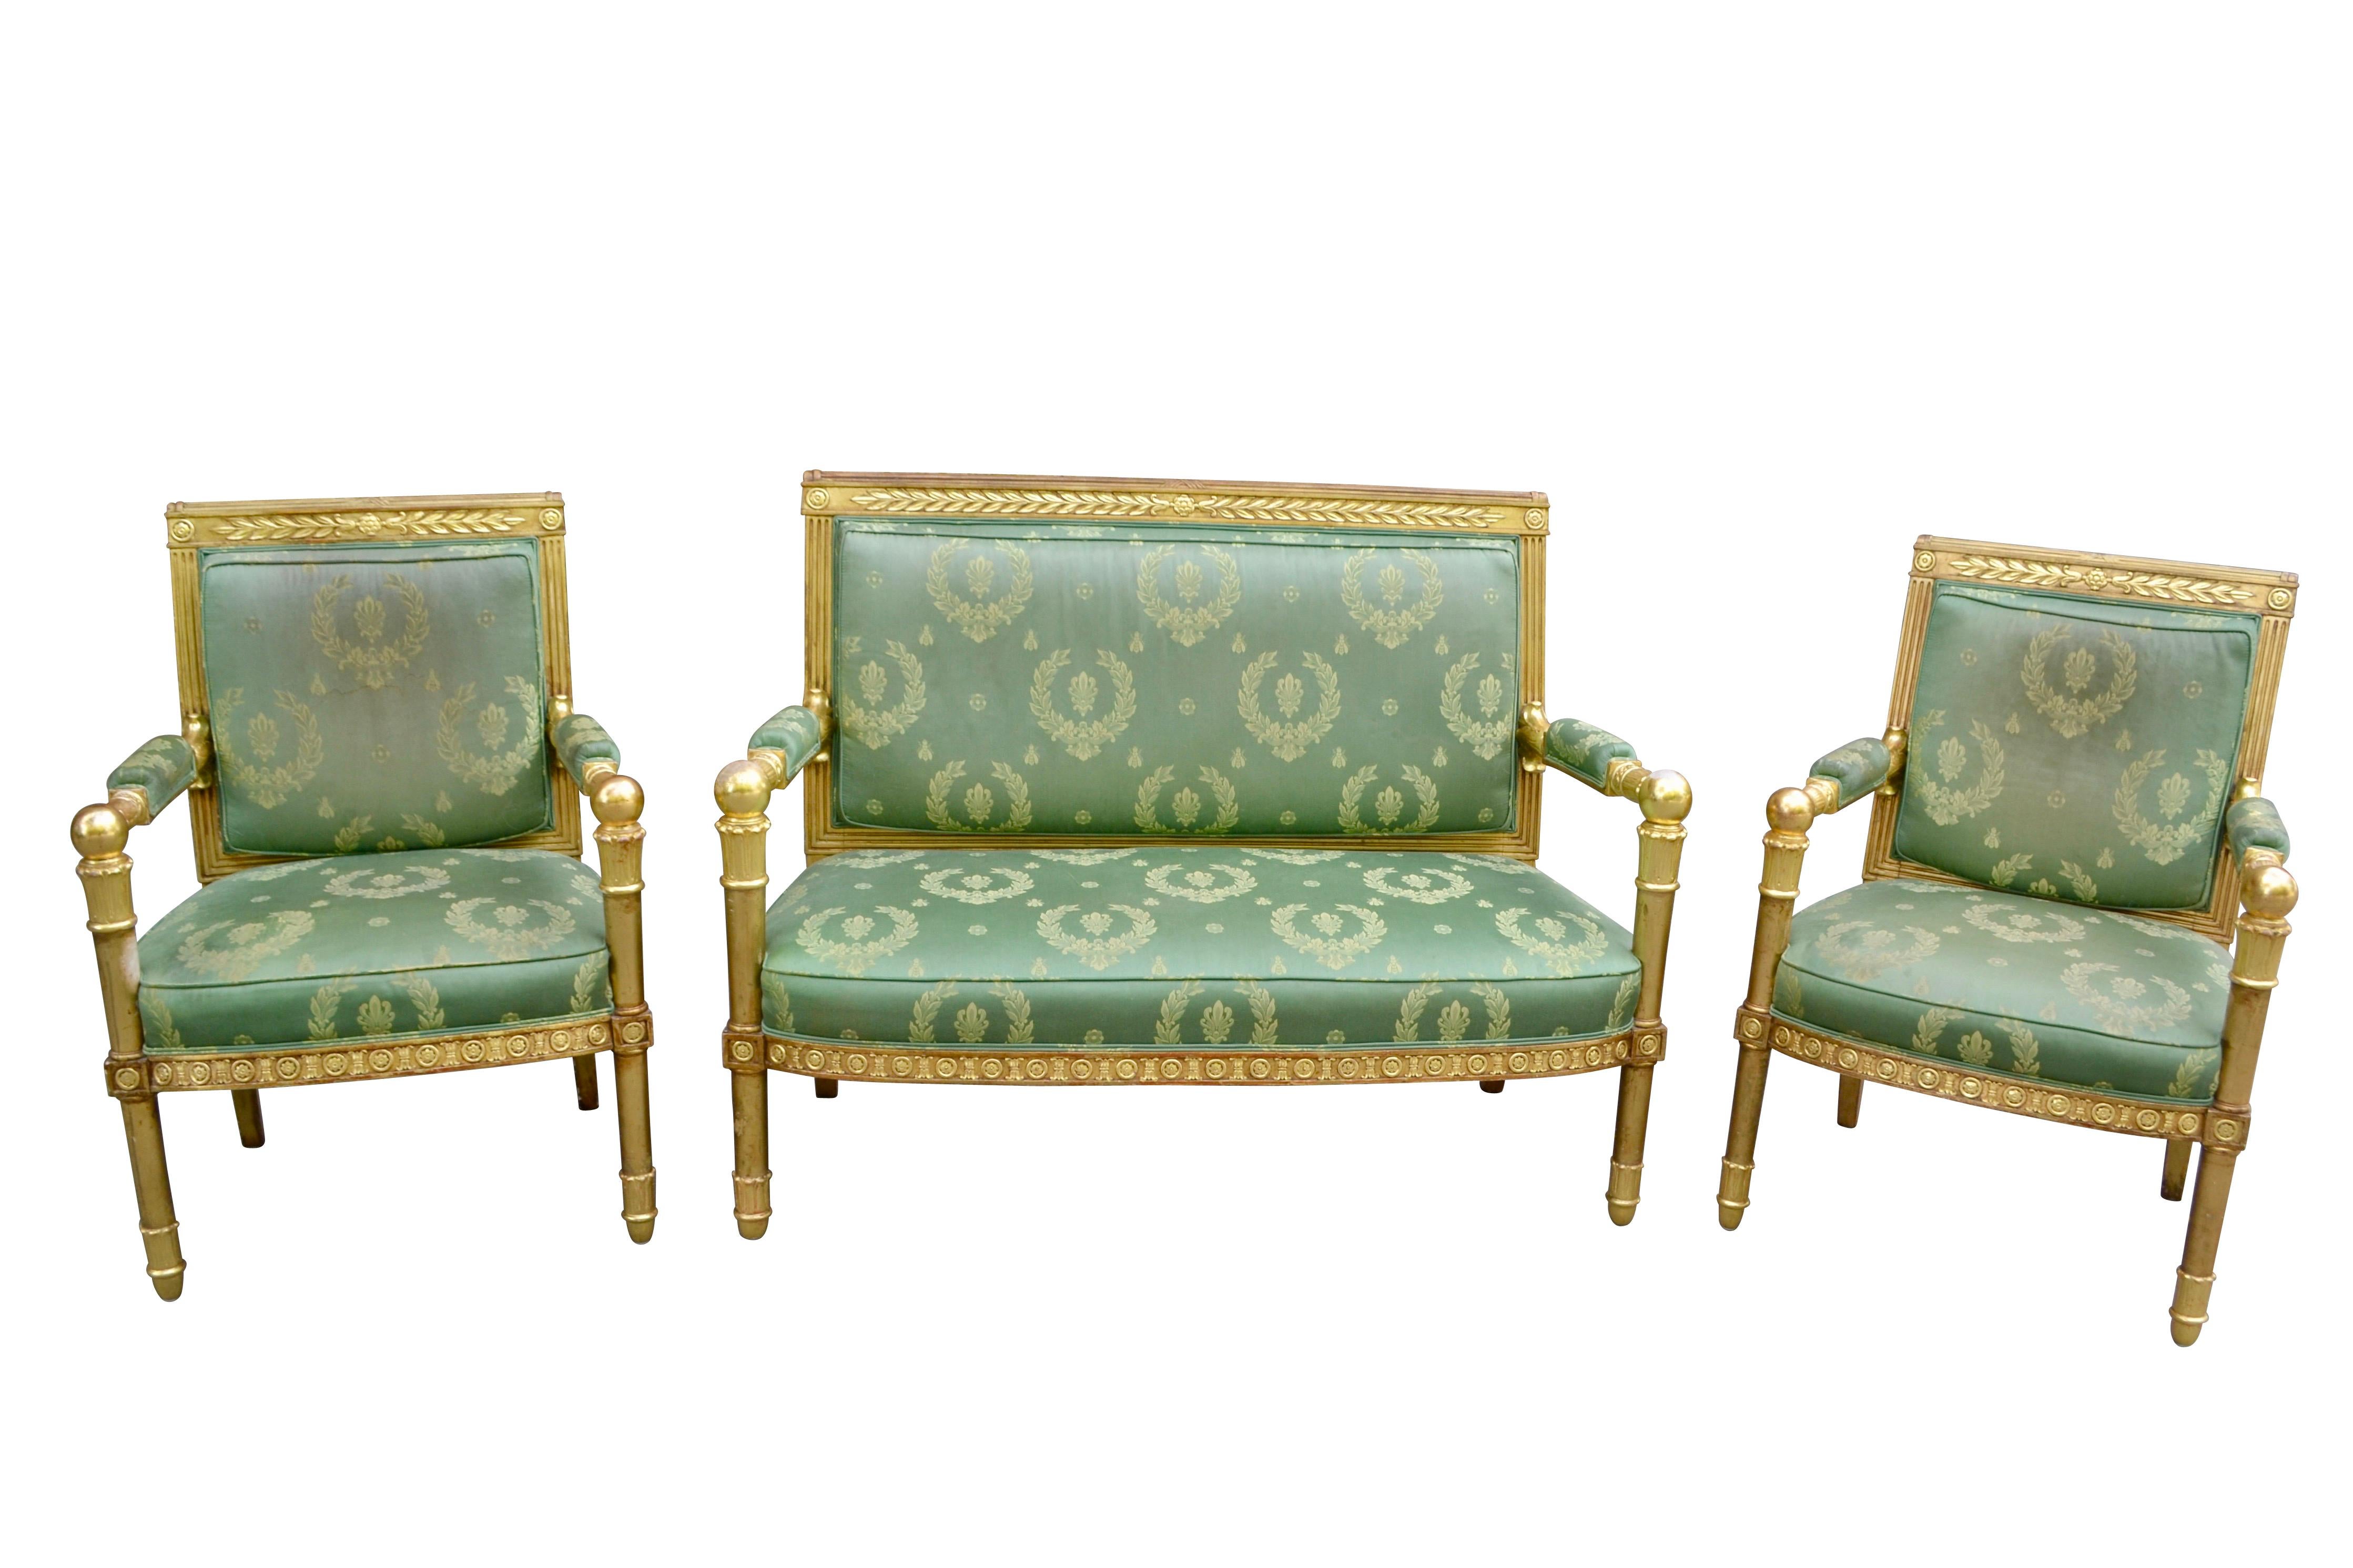 This three piece  early 19 Century  salon set  features finely carved gold leaf gilded frames  accented by  rosettes palmettes and acanthus characterizing most French Empire furniture and Decorative Arts. . While the set isn't stamped, the designs